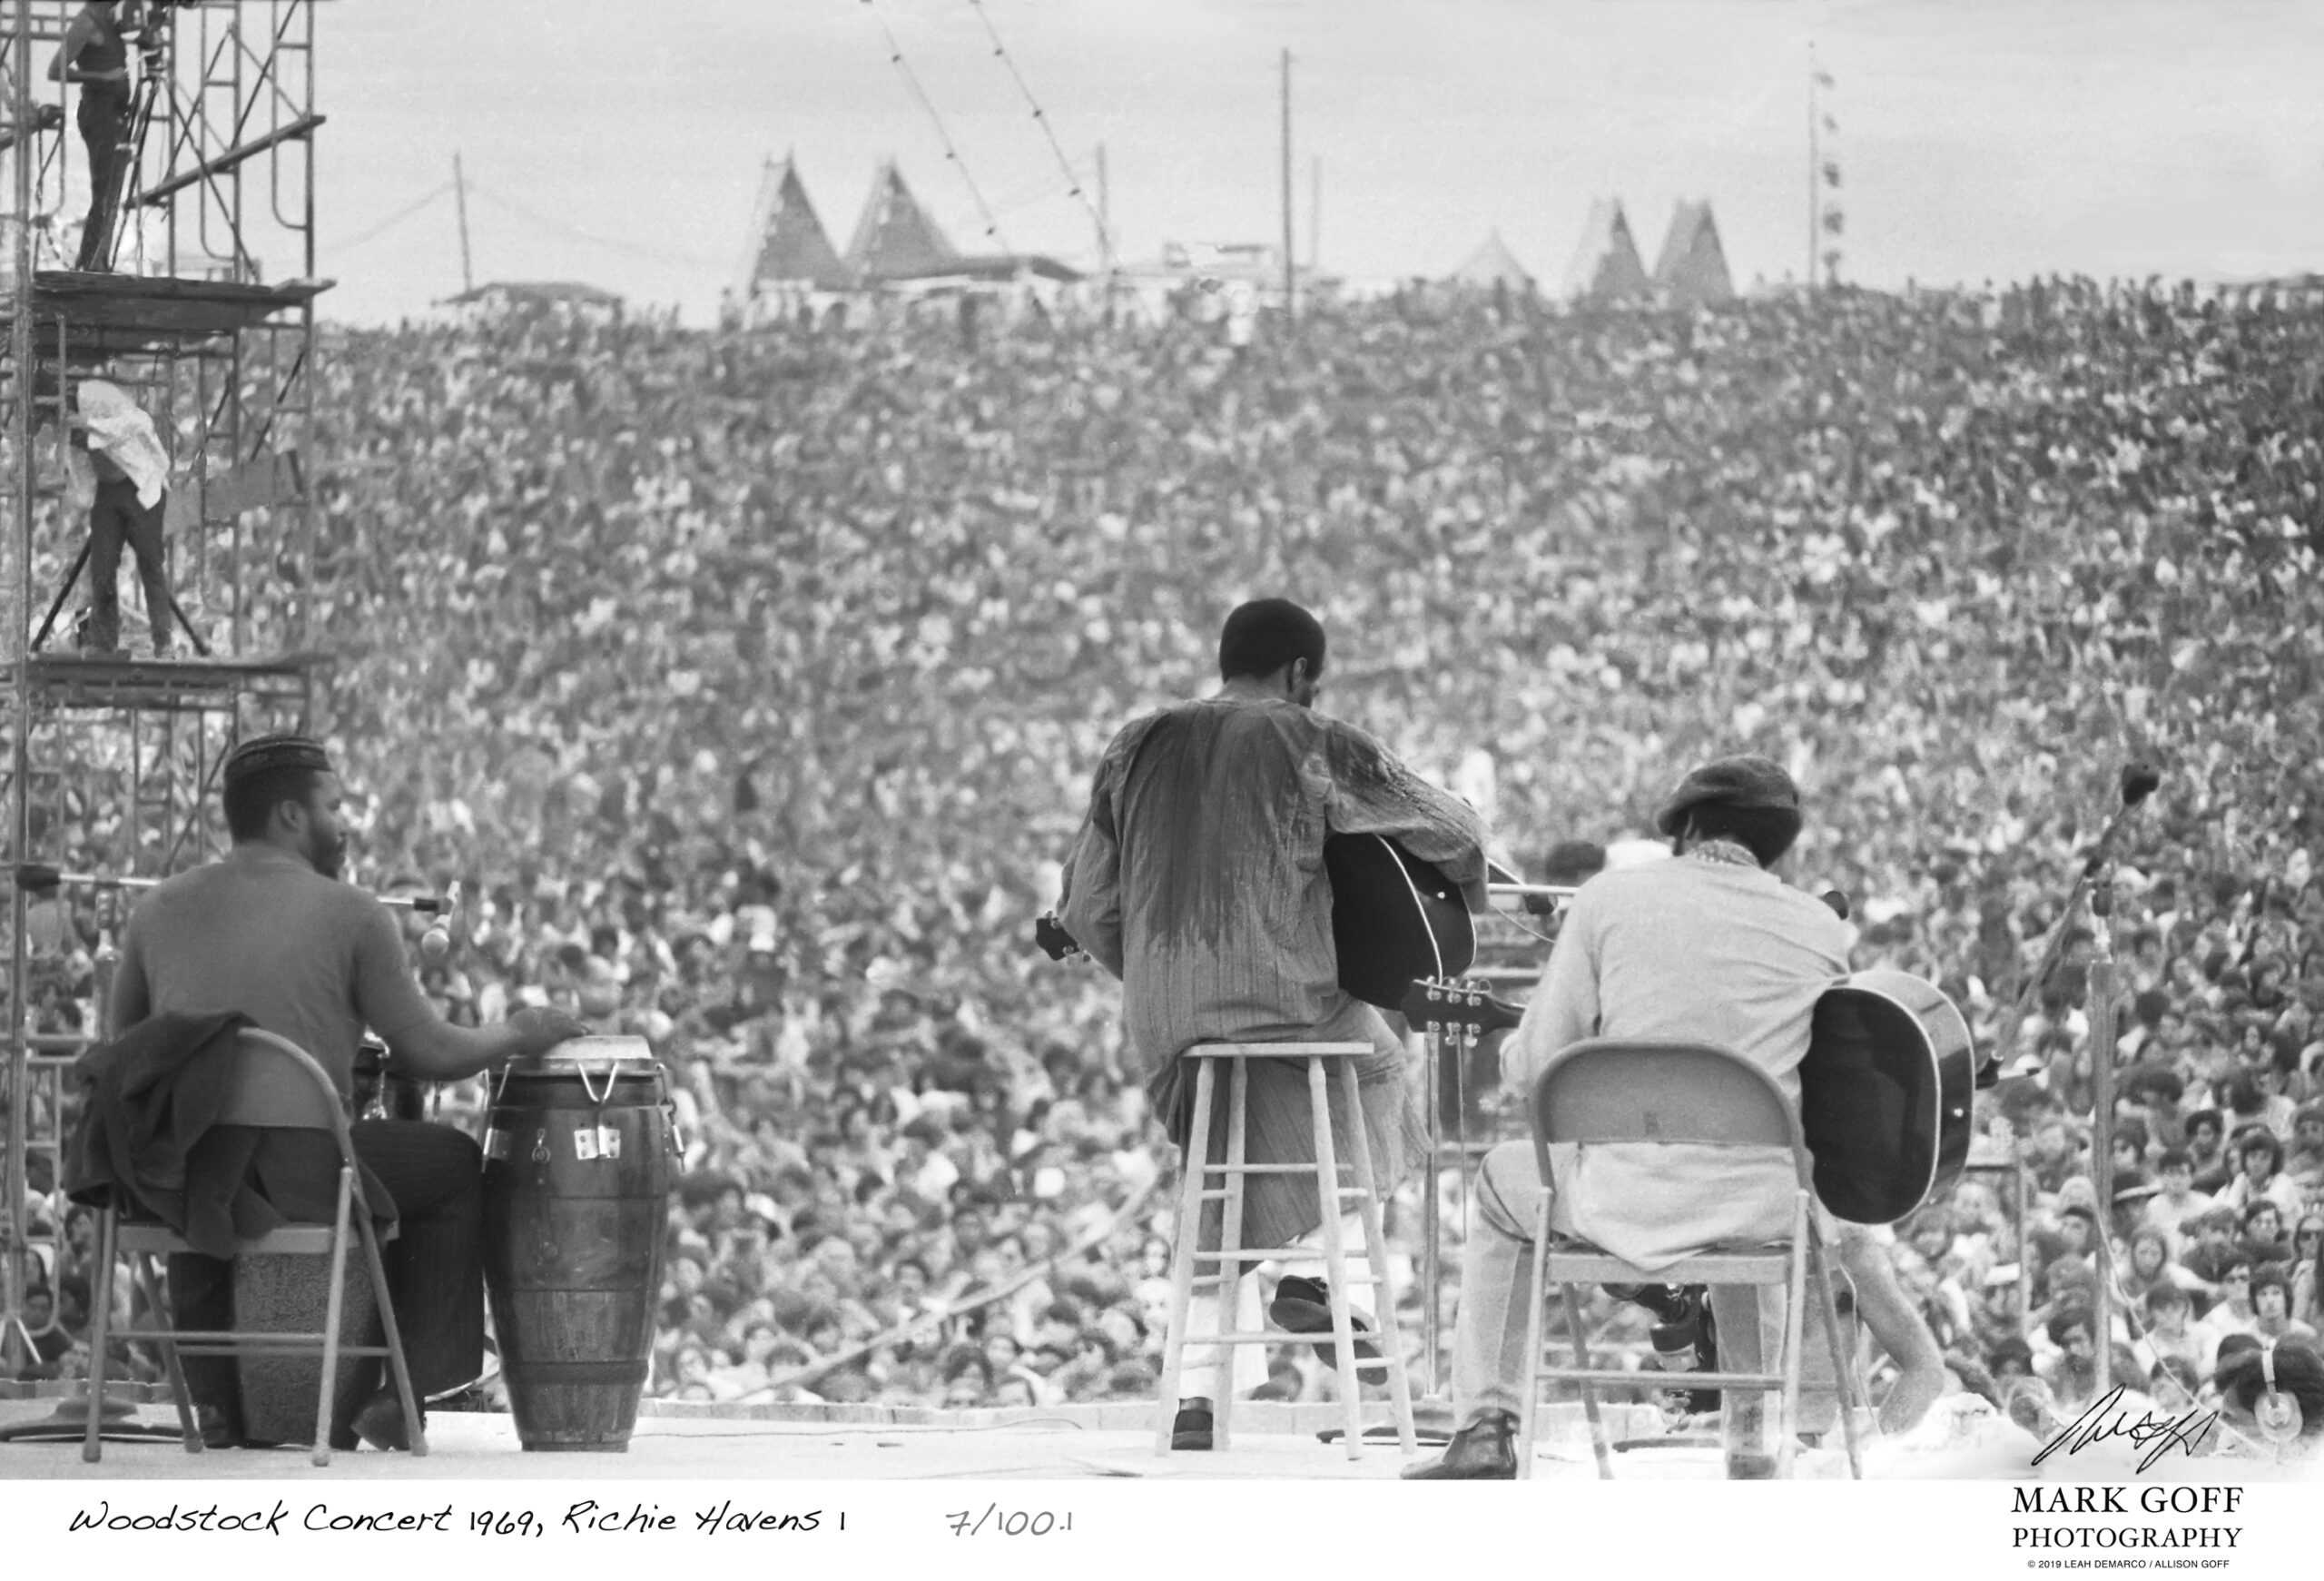 This August, 1969 photo shows Richie Havens as he performs during Woodstock